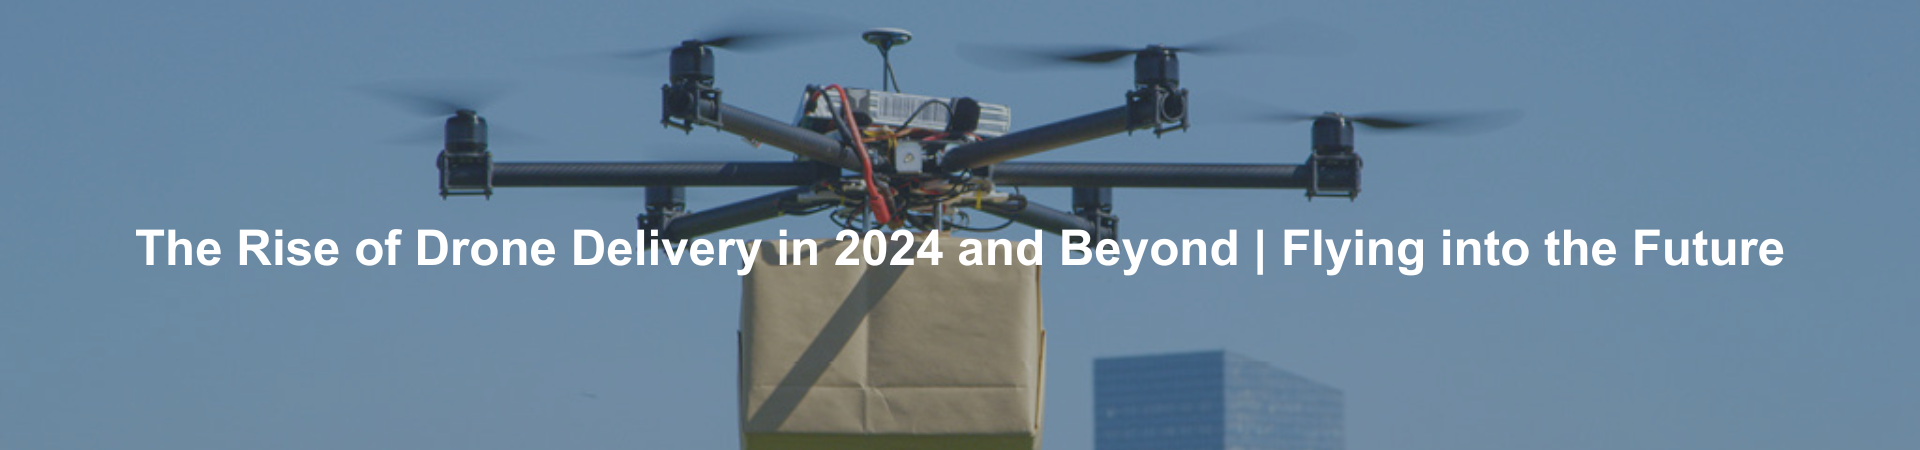 The Rise of Drone Delivery in 2024 and Beyond - Flying into the Future